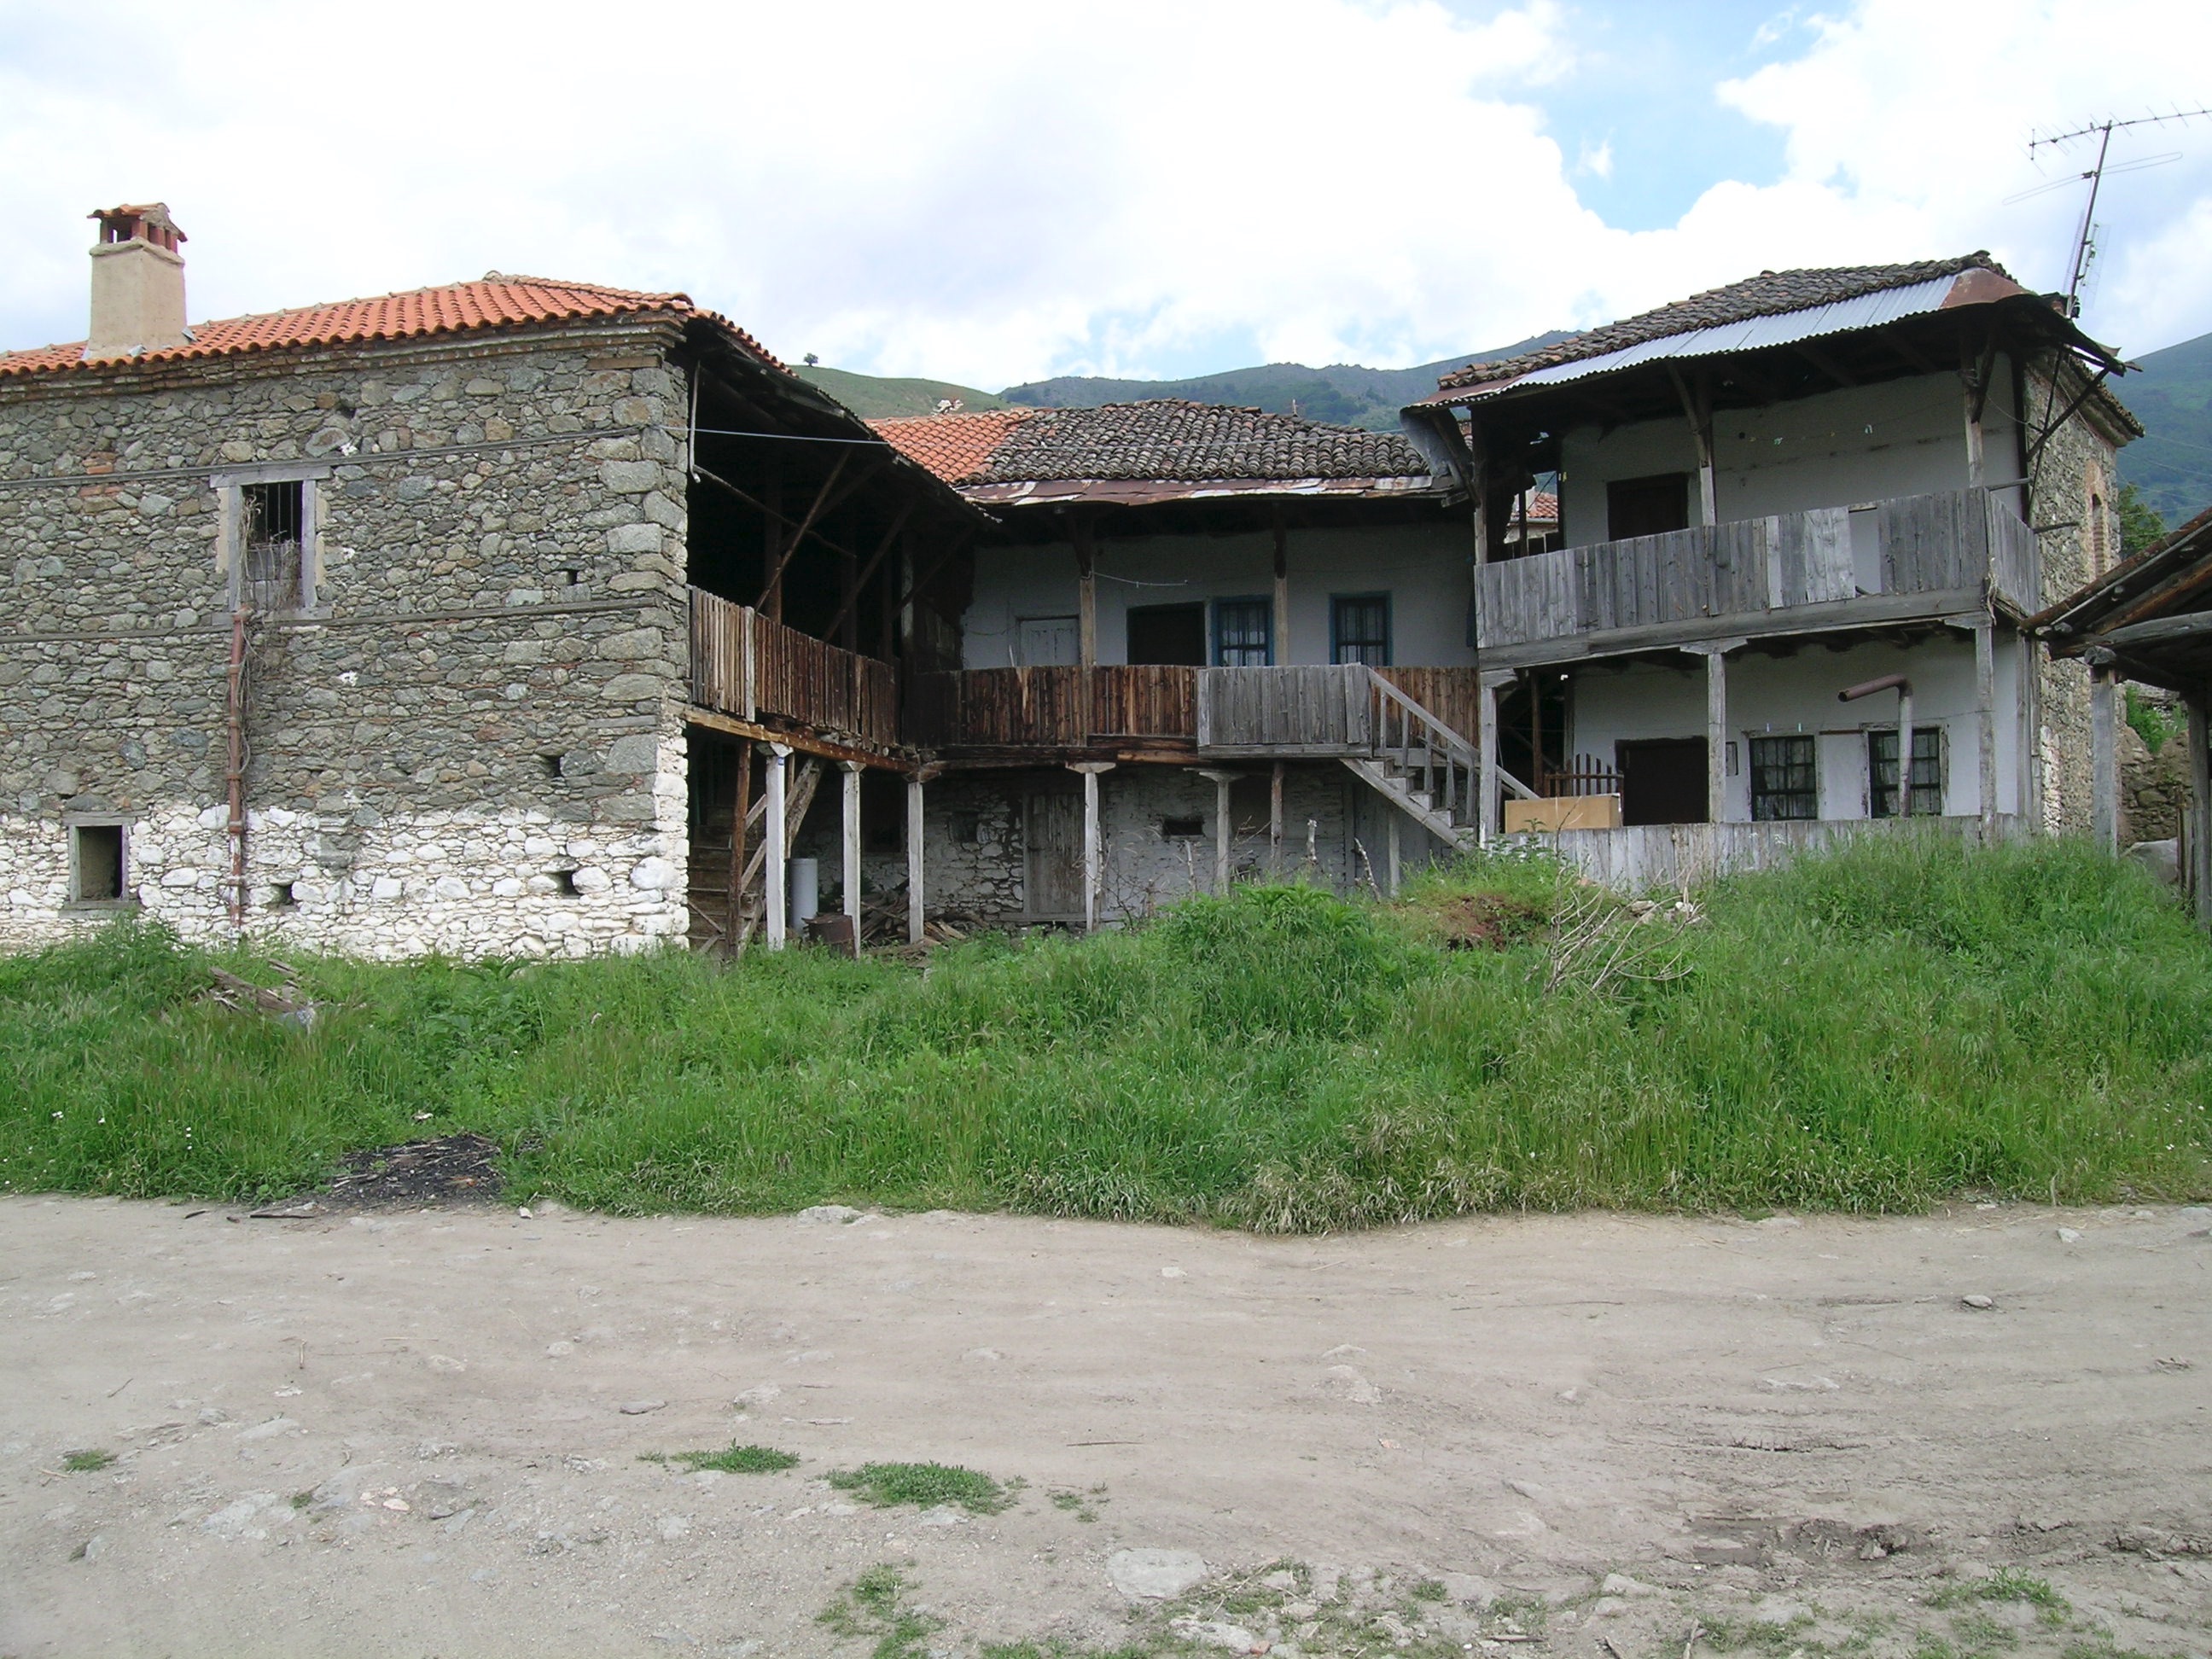 <p>In this complex of three dwellings, each structure has its own porch (tsardaki) element. The structure on the left has a new roof and chimney with its own exterior stair leading up to the tsardaki above and diagonal brackets to support the extended roof. The structure in the rear appears to join the other two structures together by modifications to the porches and a stair to link it to the structure on the right.</p>